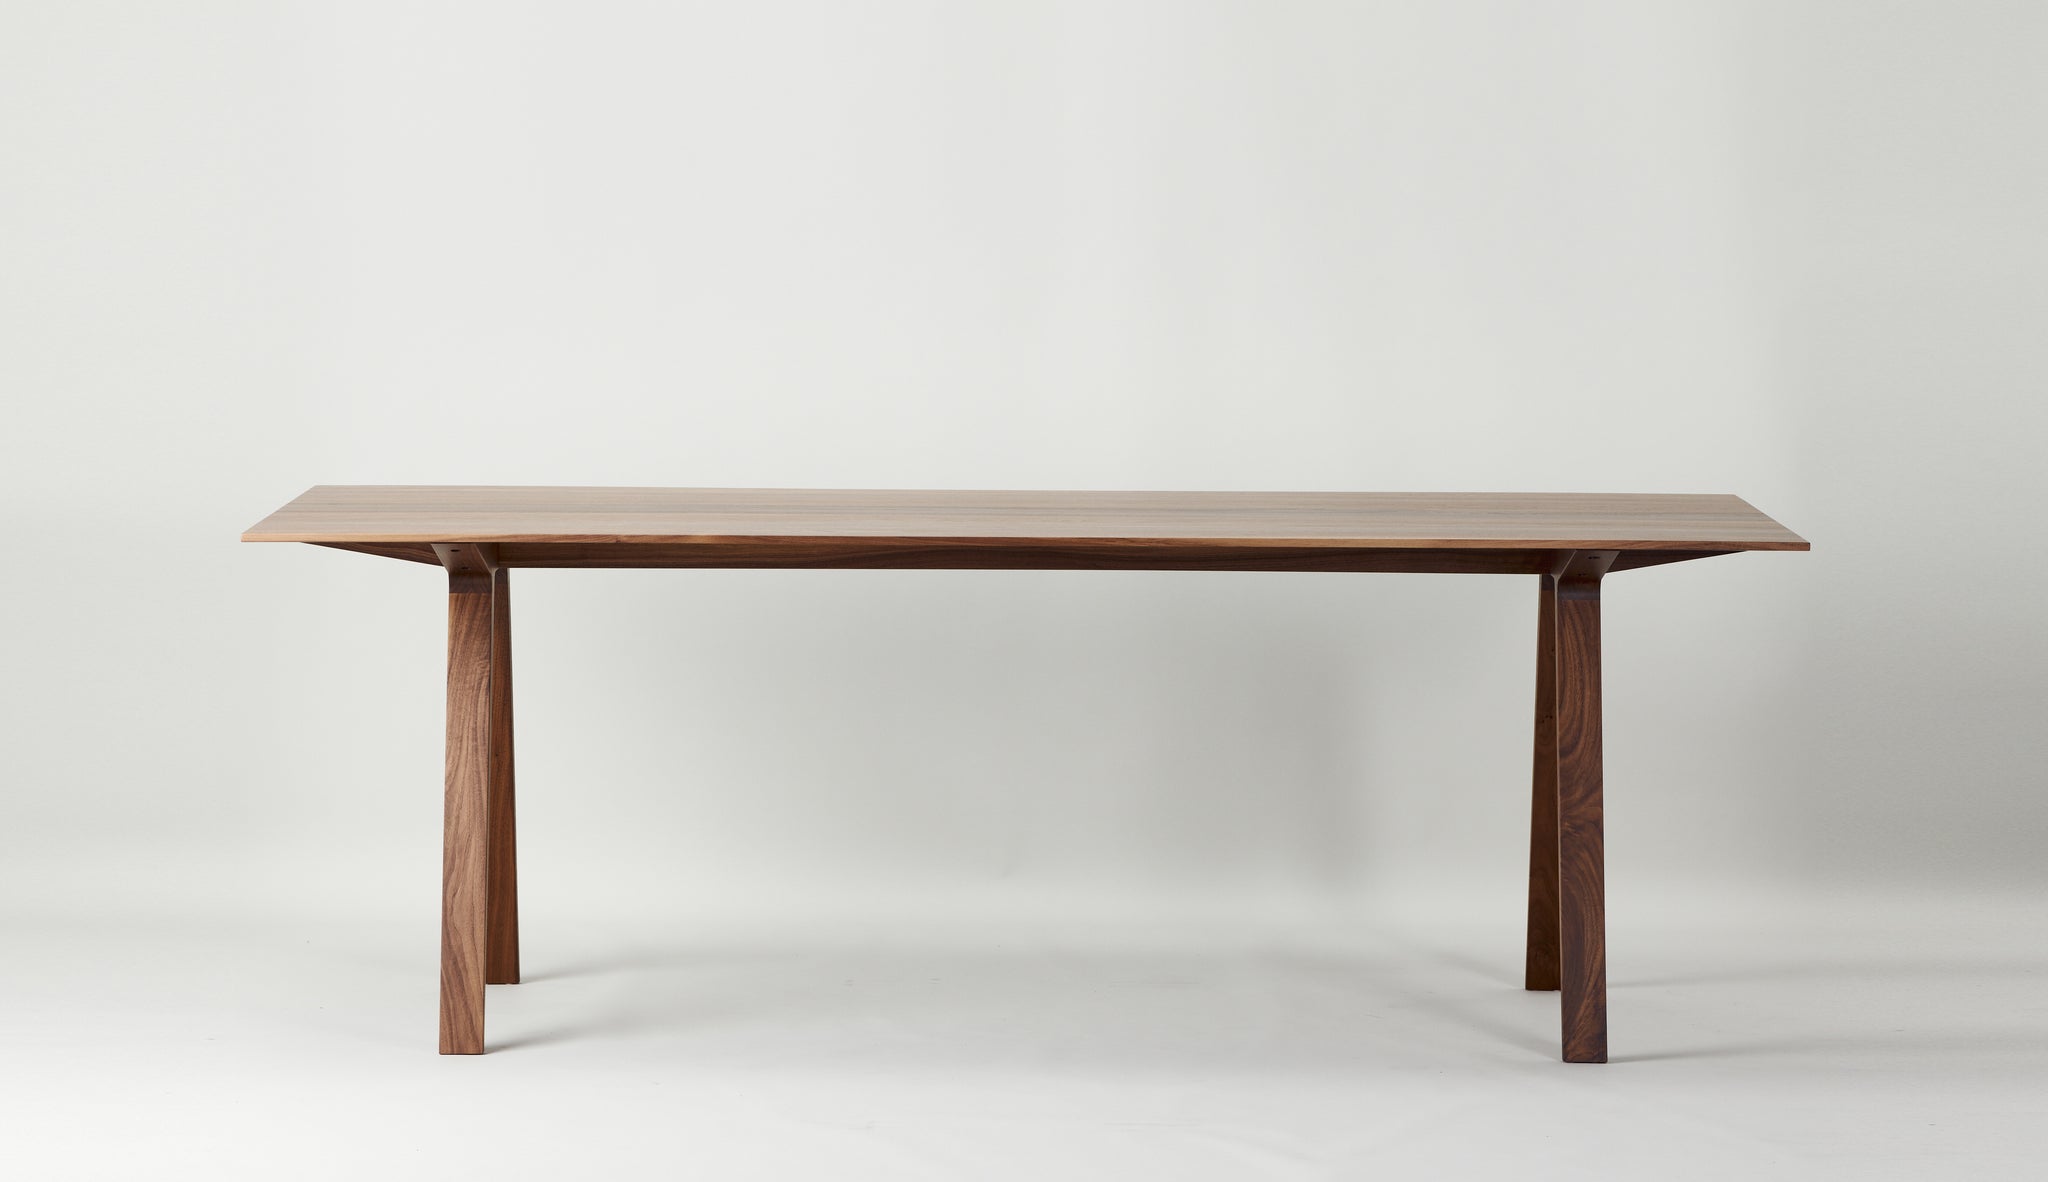 Louis table in Walnut. Designed by Tom Fereday in Australia and handmade by Mast Furniture. 